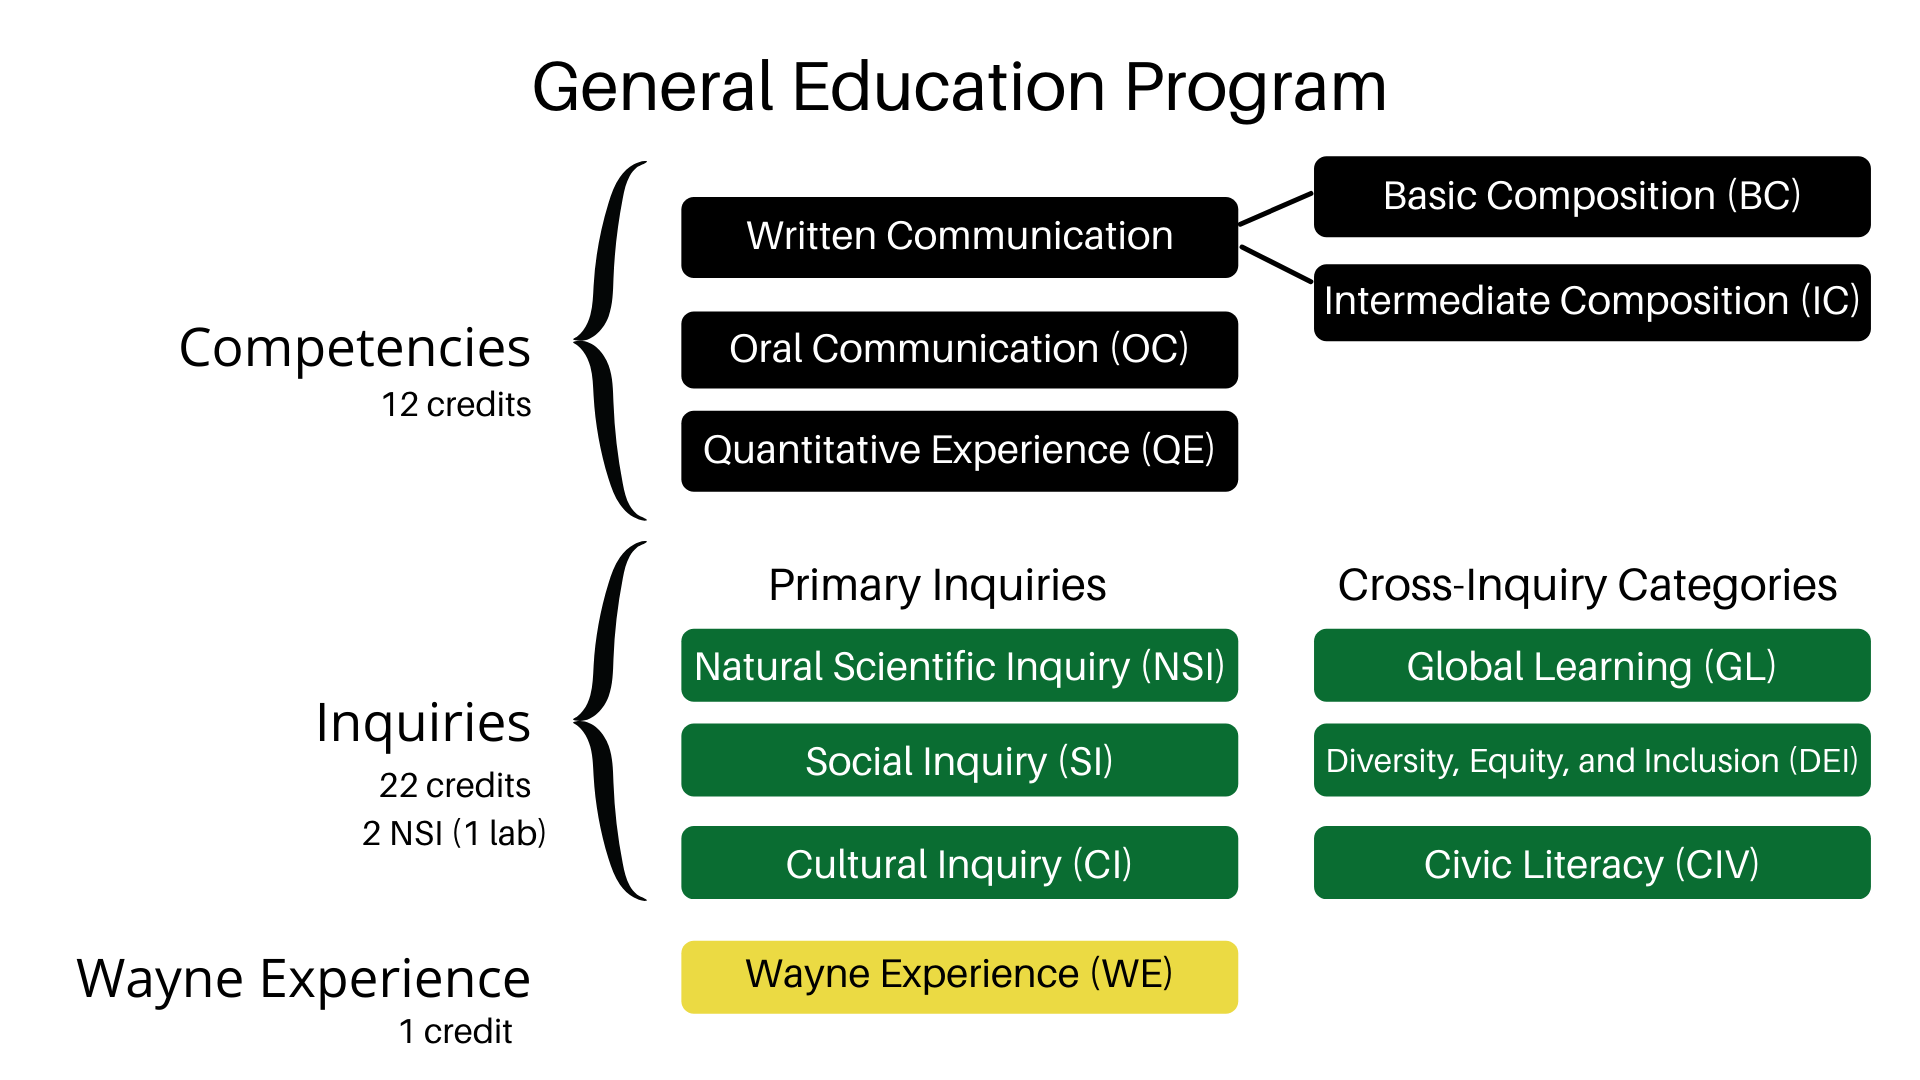 General Education Program structure - 11 courses (Basic Composition, Intermediate Composition, Oral Communication, Quantitative Experience, Natural Scientific Inquiry, Cultural Inquiry, Social Inquiry, Global Learning, Diversity, Equity, and Inclusion, Civic Literacy, and Wayne Experience) distributed across 3 main categories (competencies, inquiries, and Wayne Experience) for a total of 35 credits (2 NSI, 1 with a lab requirement)